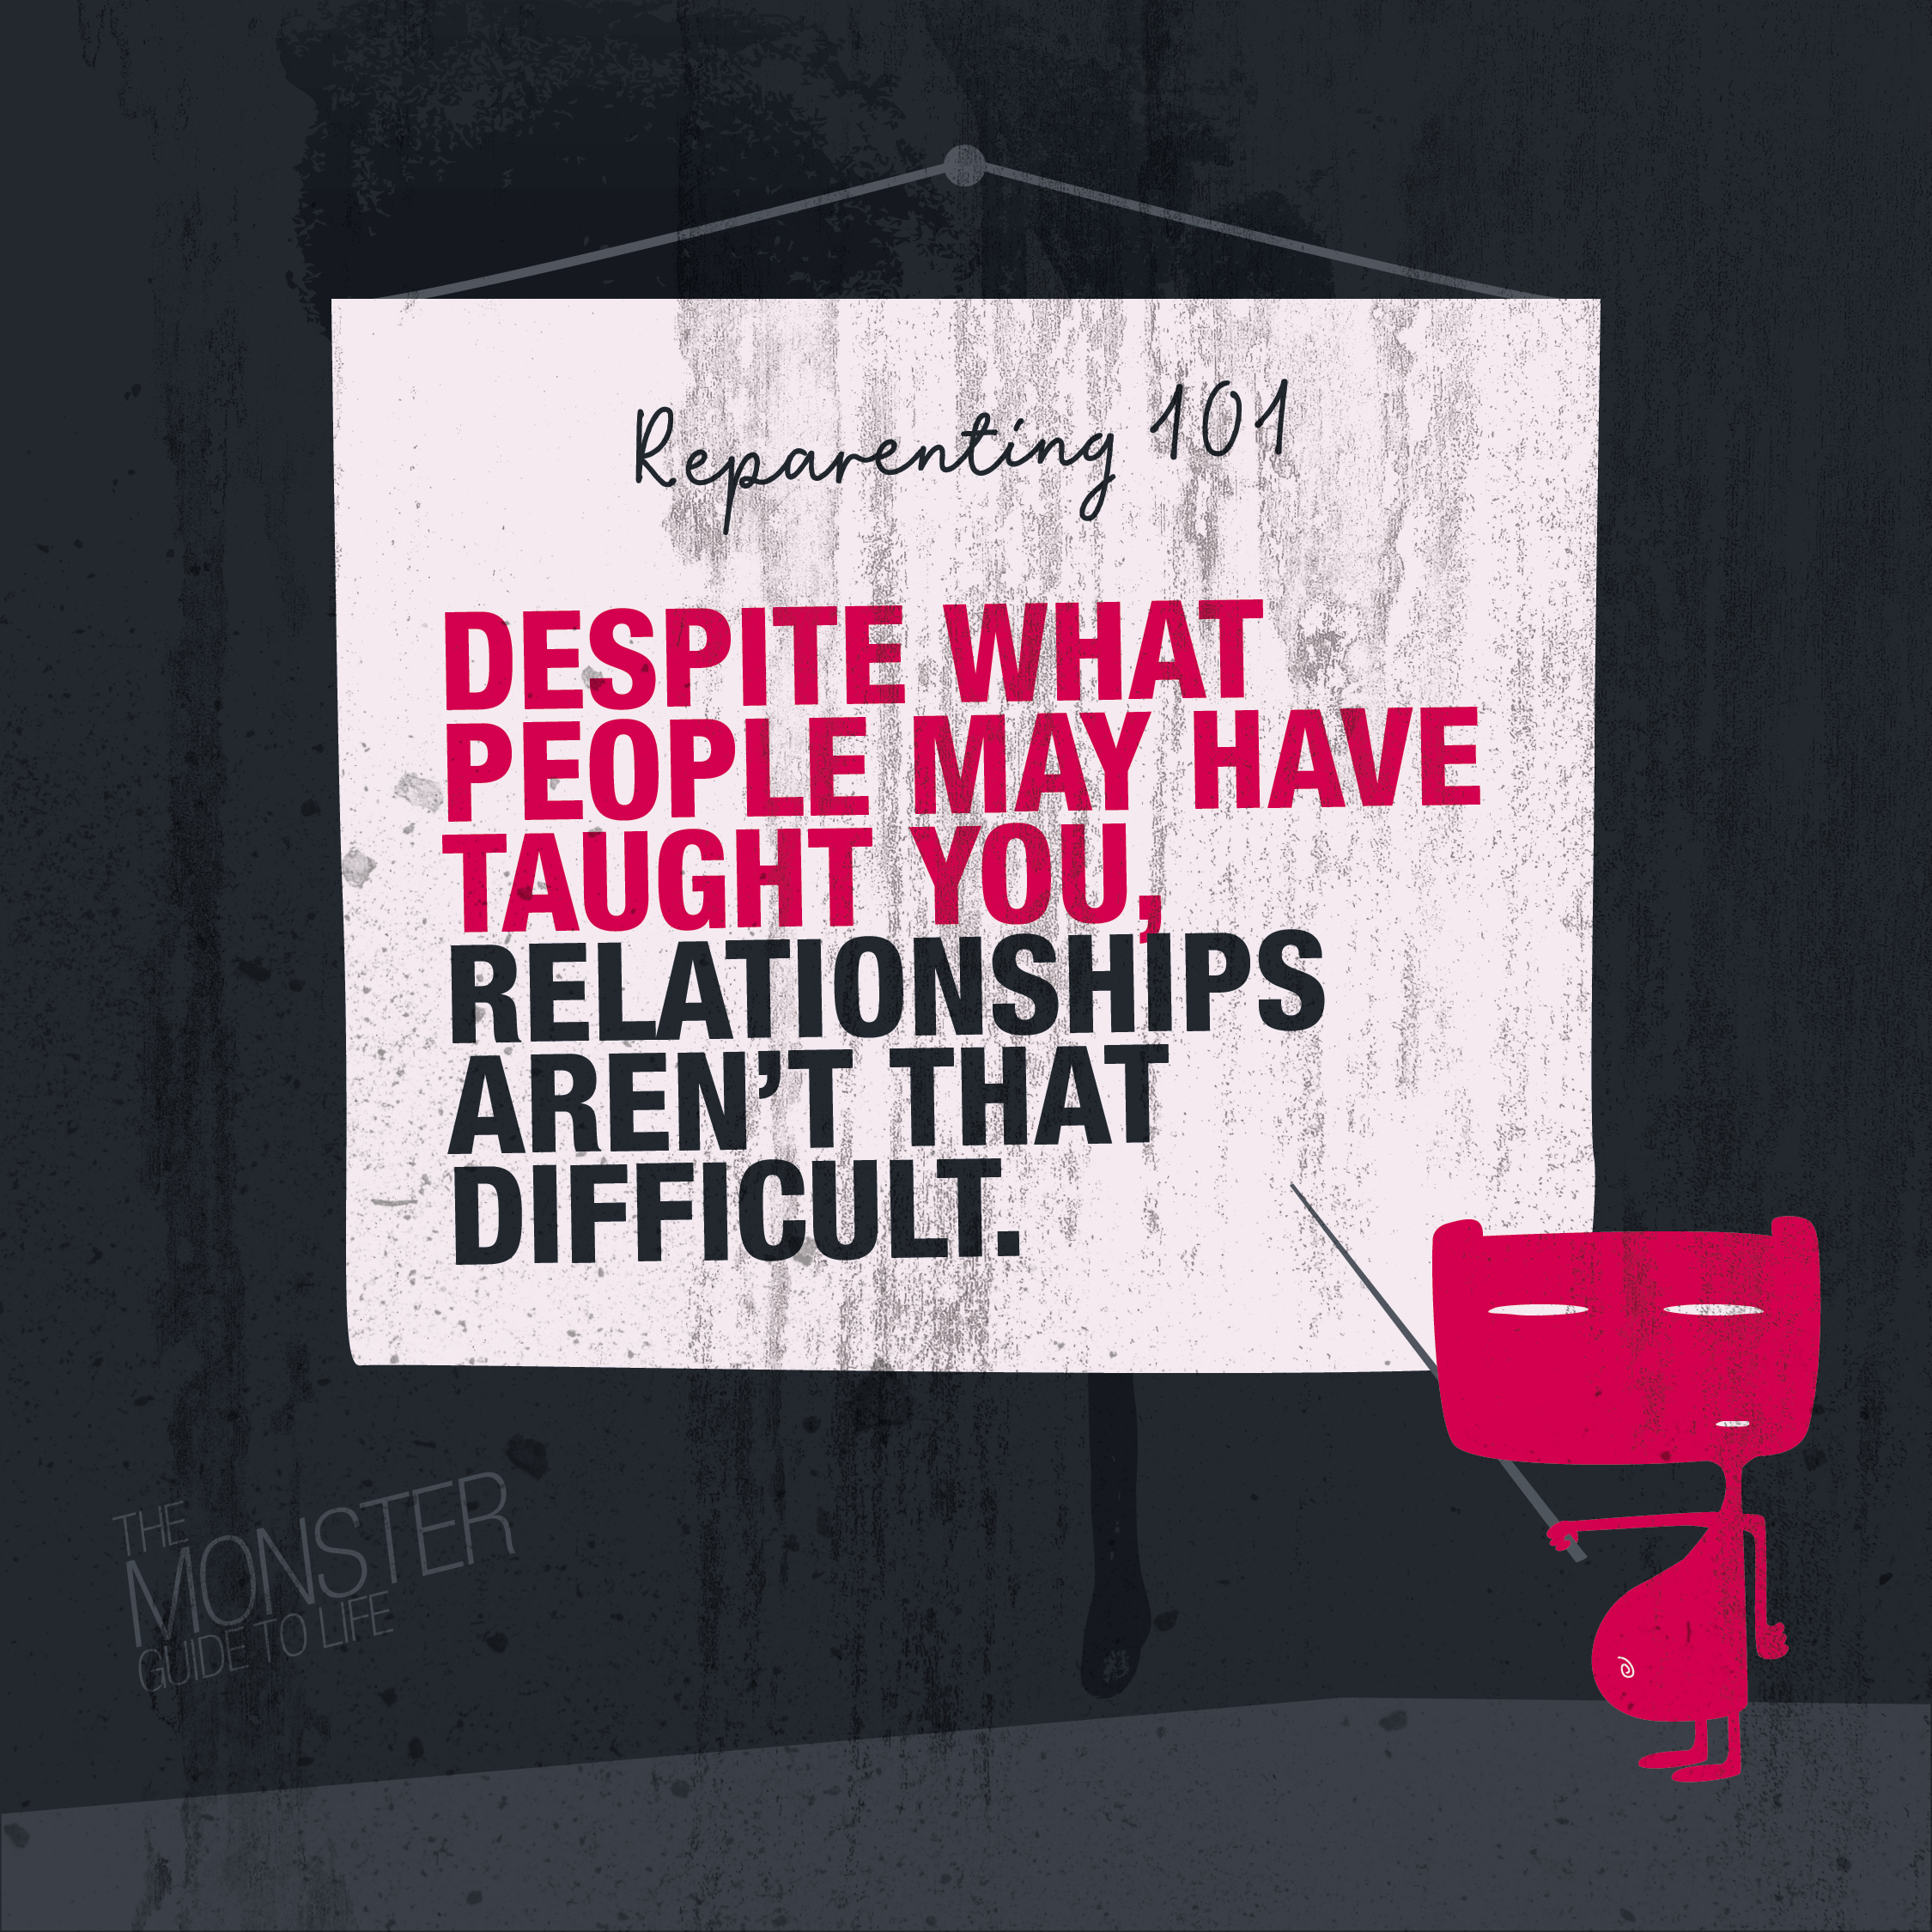 Despite what people may have taught you, relationships aren't that difficult